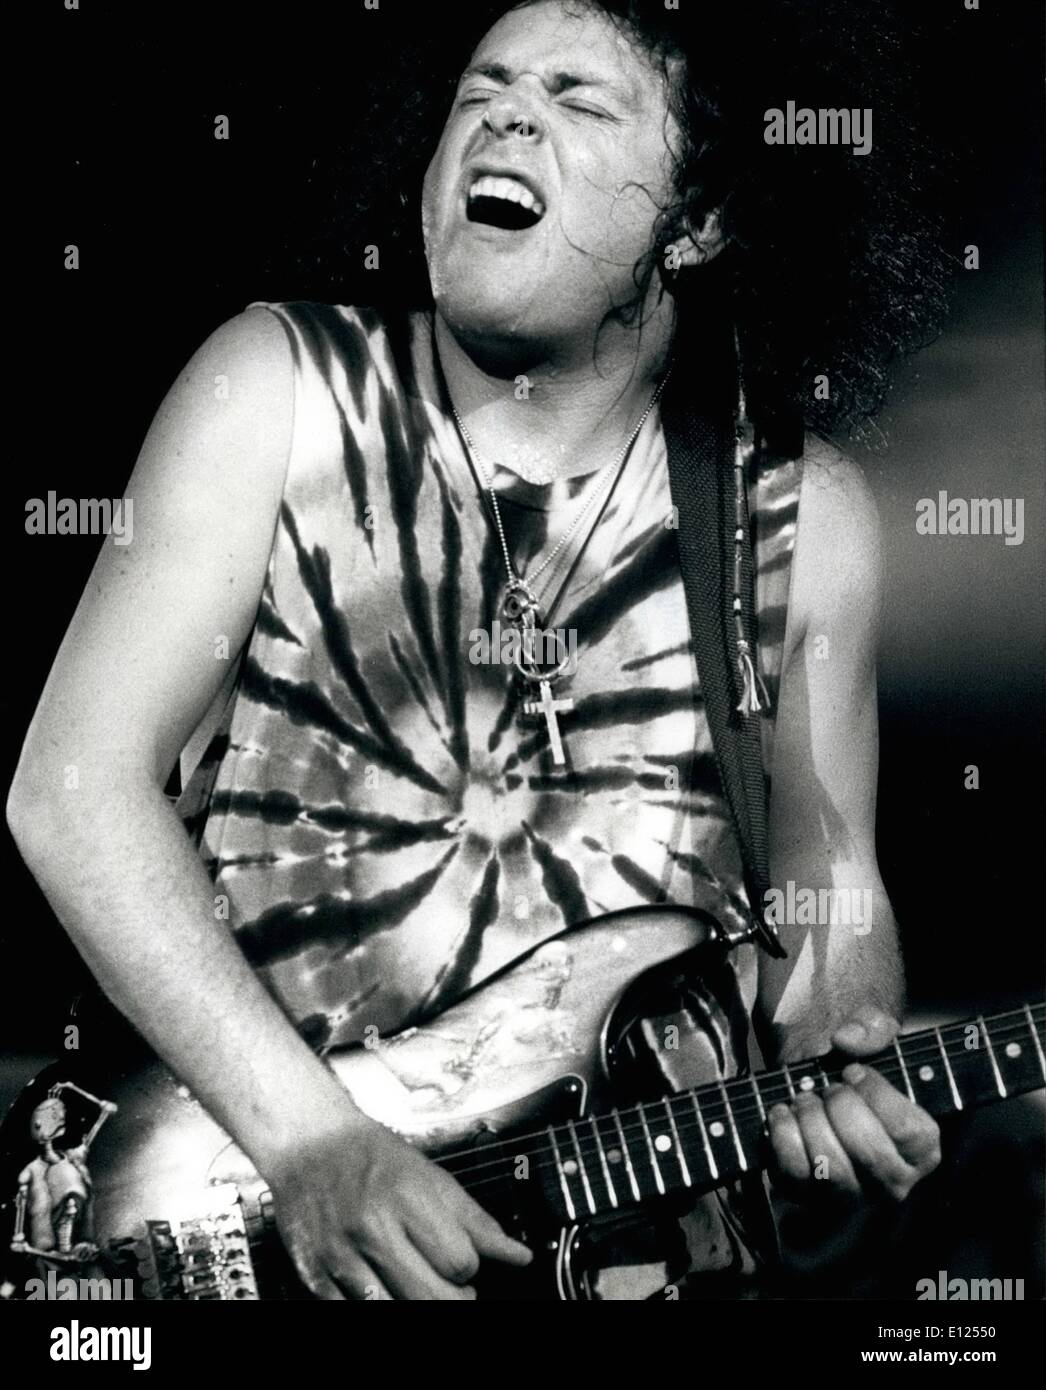 Jul. 07, 1991 - Jazz Festival Montreux 1991 Steve Lukather of ''Toto'': The Montreux Jazz Festival takes place in Montreux at the Lake of Geneva from 2nd July to 21 July. Photo Shows Steve Lukather of ''Toto'' on guitar. Stock Photo